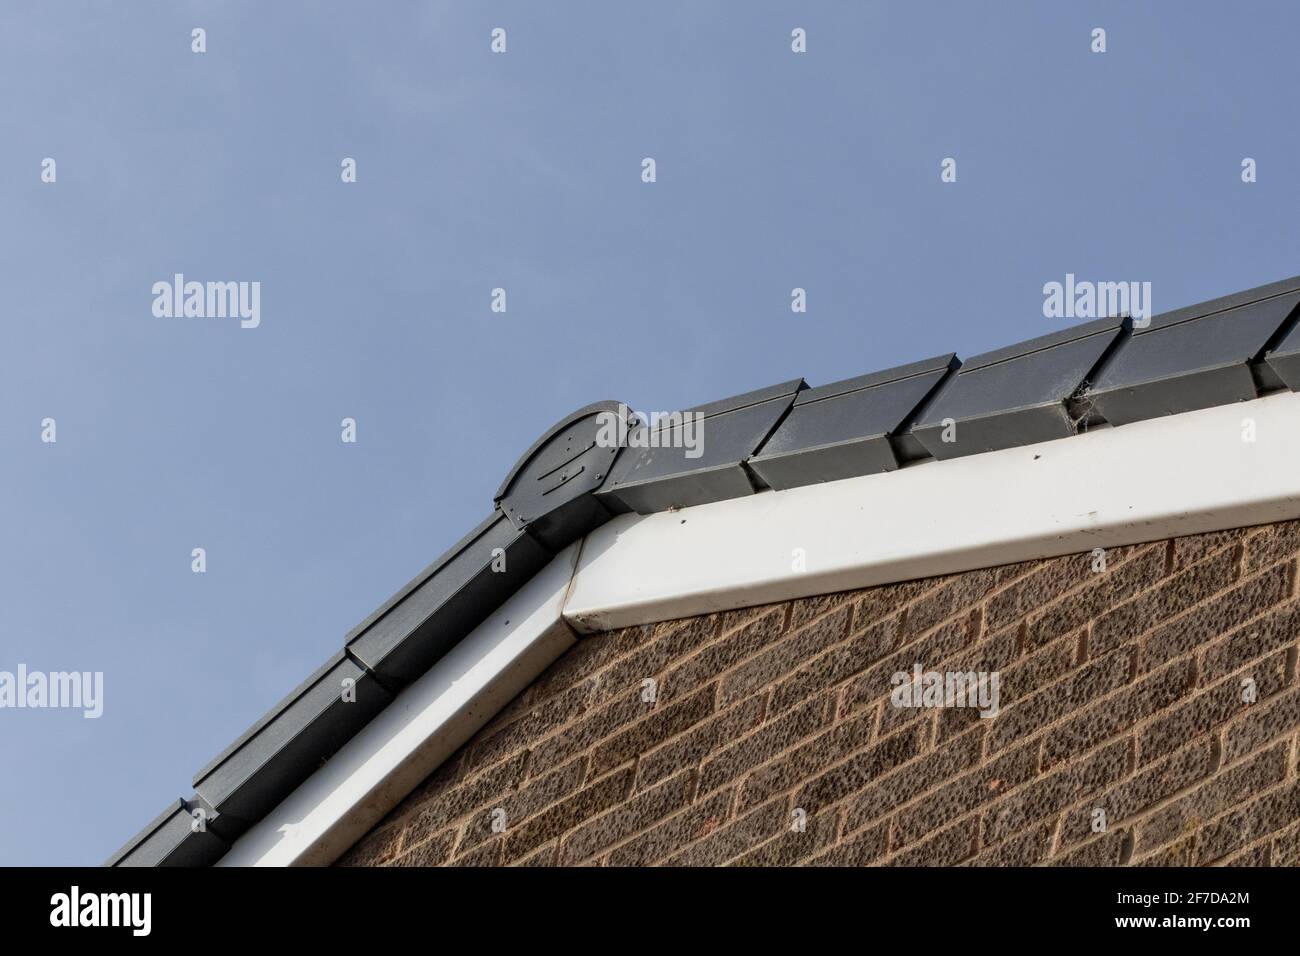 A dry verge roof system on the gable end of a house. Stock Photo